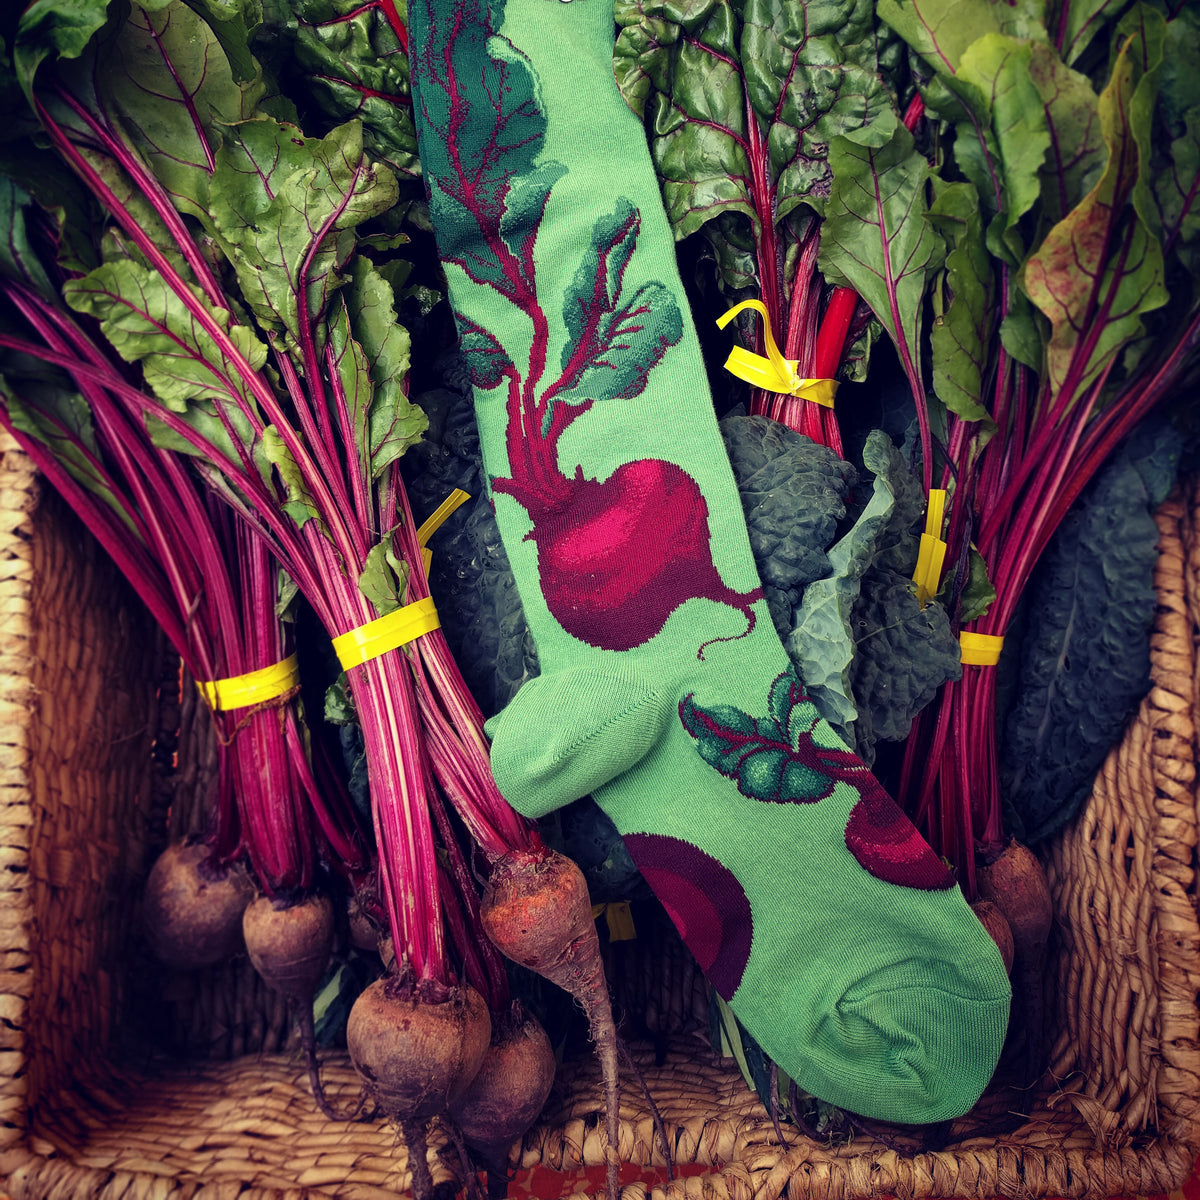 Red beets on a green knee sock — the perfect socks for a Saturday at the farmers market.